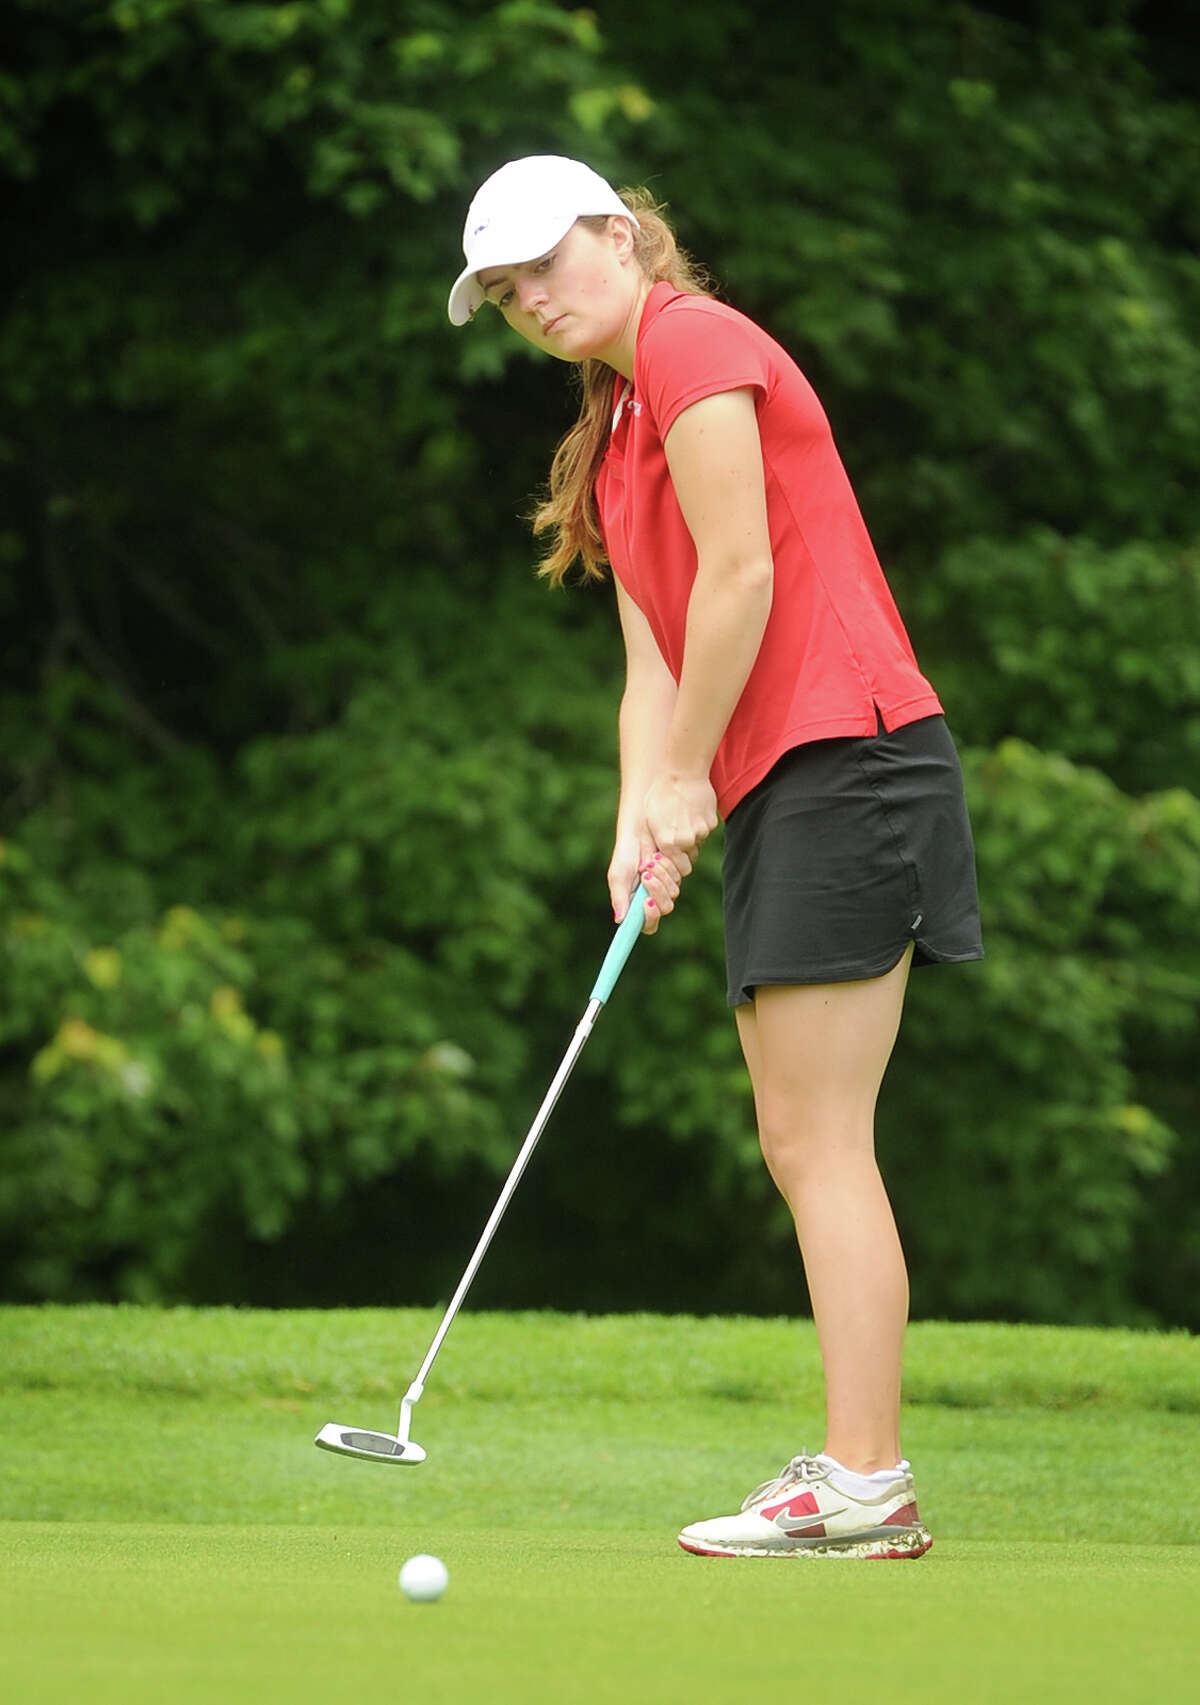 Greenwich's Catherine McEvoy knocks in a birdie putt on the 7th hole of the Girls Golf State Championship at Orange Hills Country Club in Orange, CT on Tuesday, June 9, 2015.